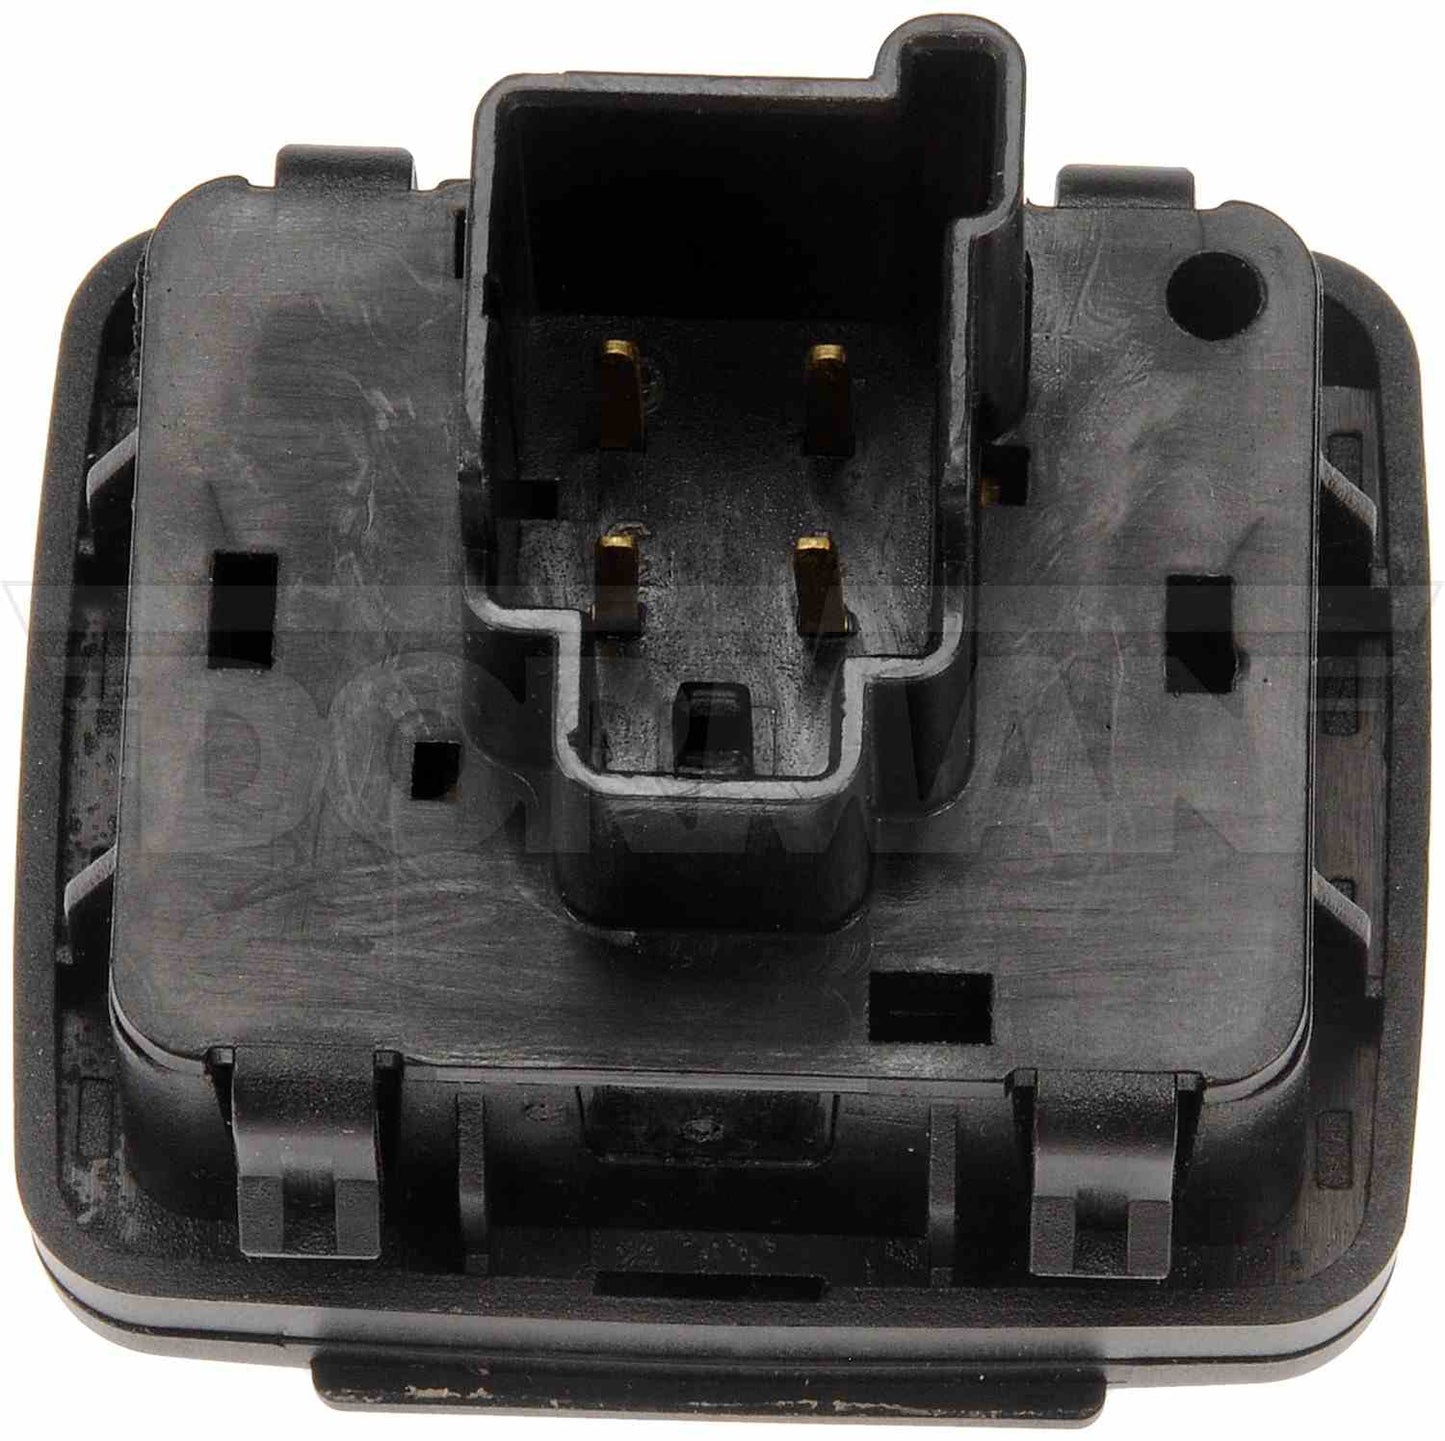 Back View of 110 Volt Accessory Power Outlet MOTORMITE 84942